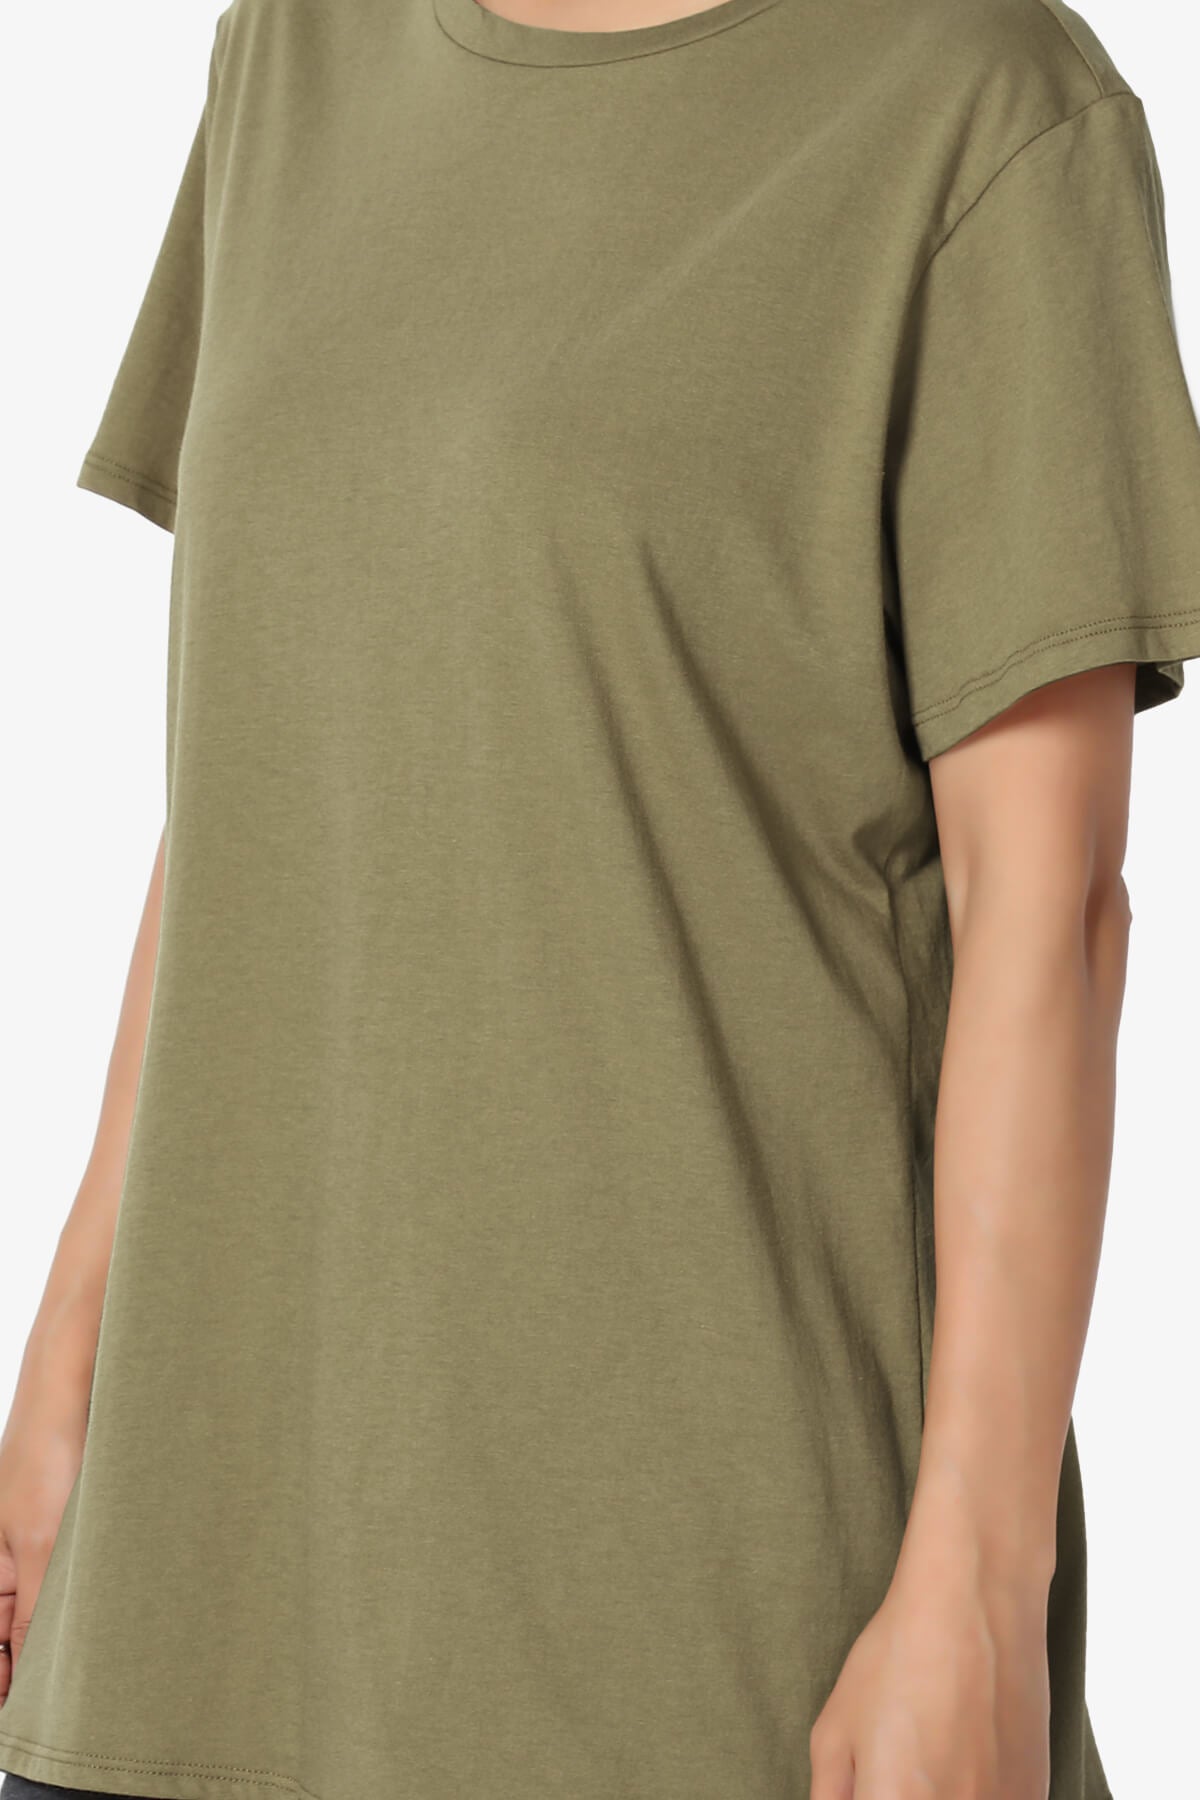 Load image into Gallery viewer, Mayra O Neck Cotton Boyfriend Tee OLIVE KHAKI_5
